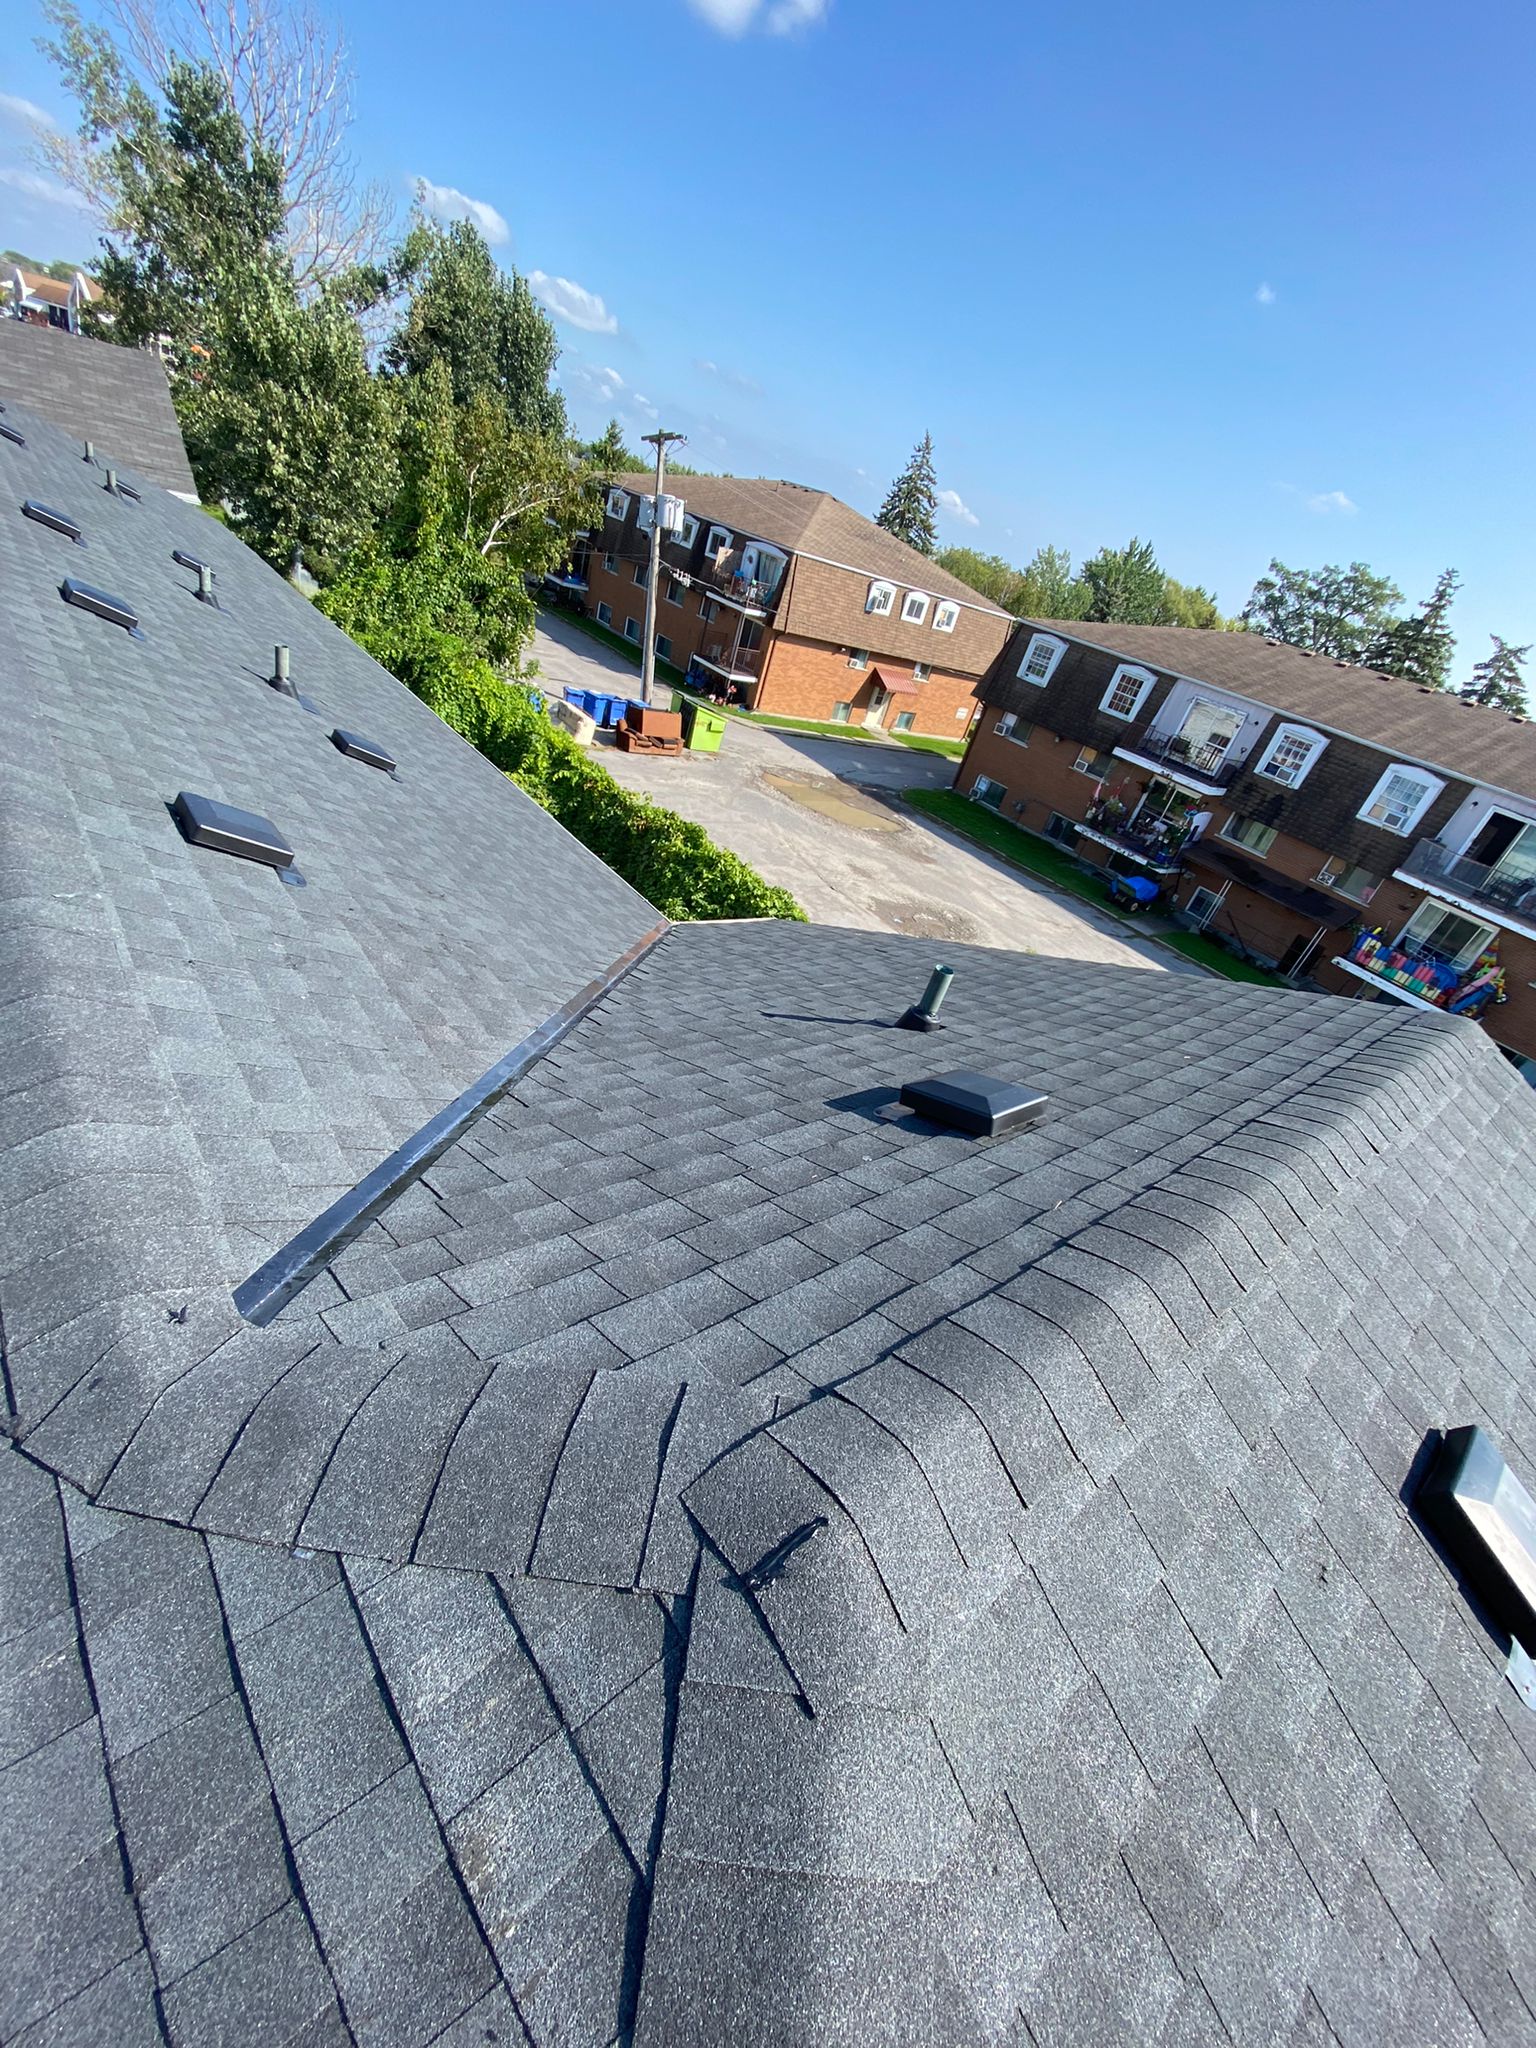 How Commercial Roofing Is Different Than Residential Roofing?